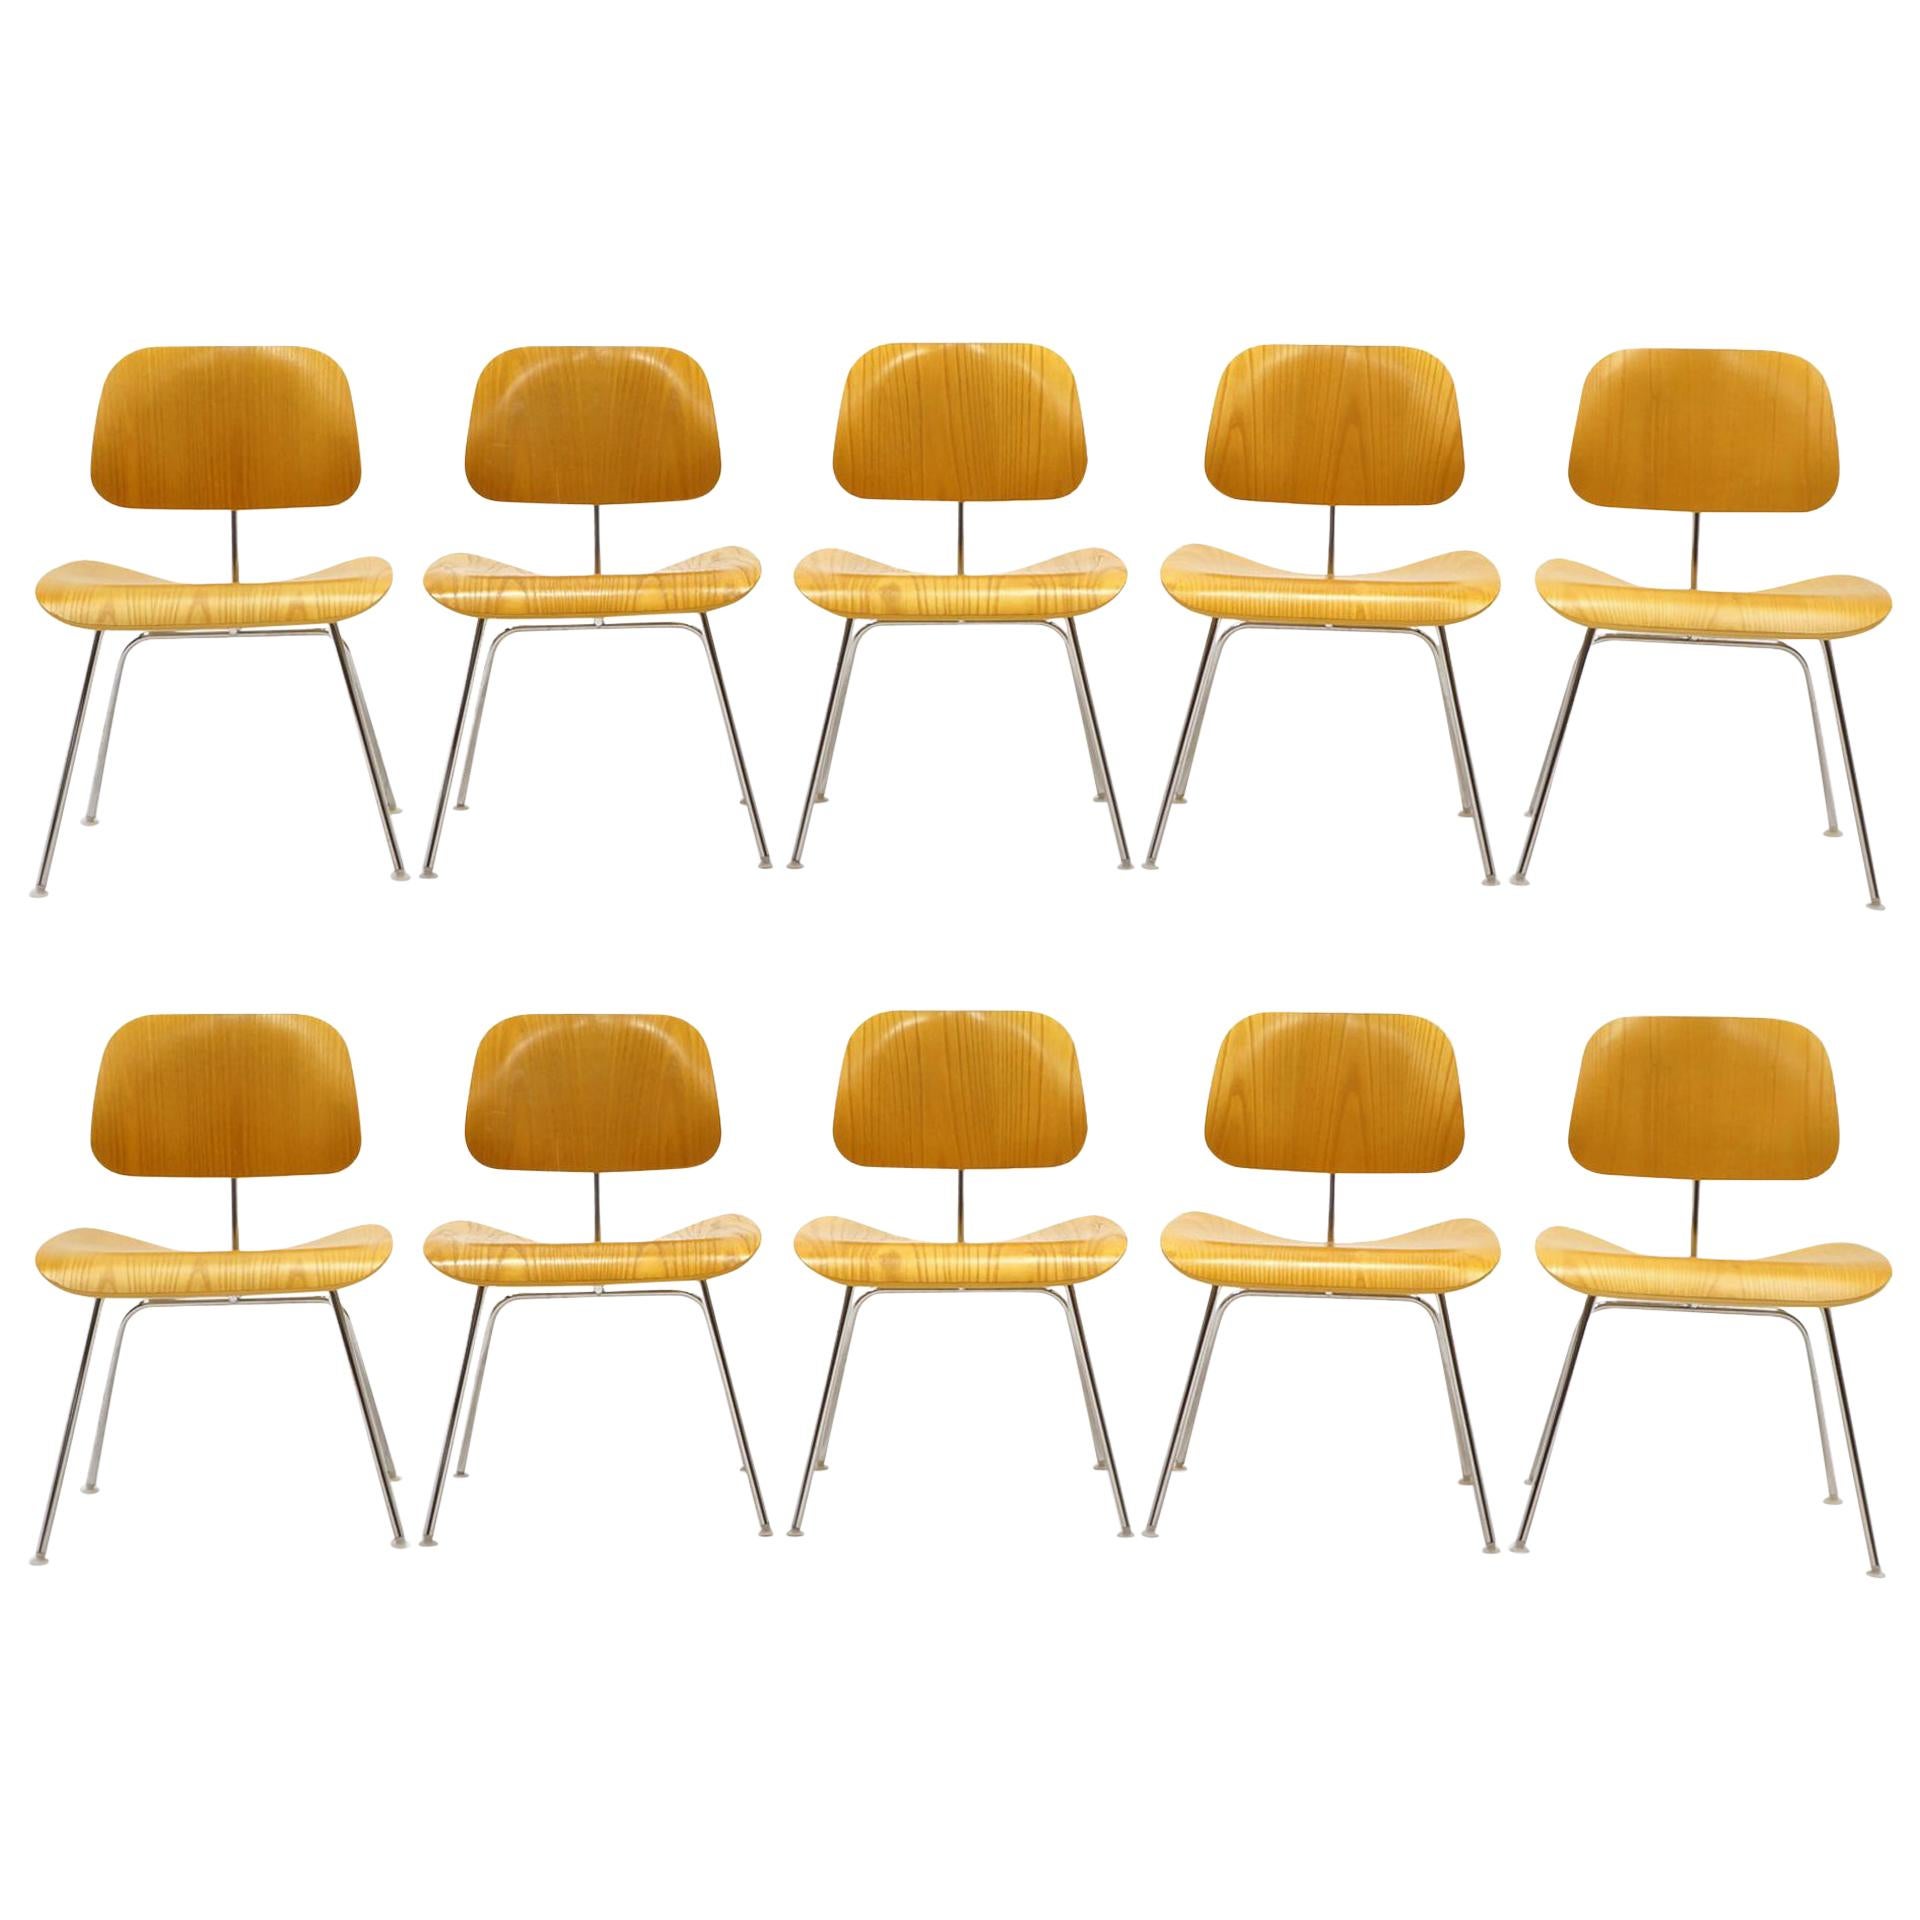 Charles Eames Plywood Dining Chairs, DCMs, Ten Available, Price is for Each